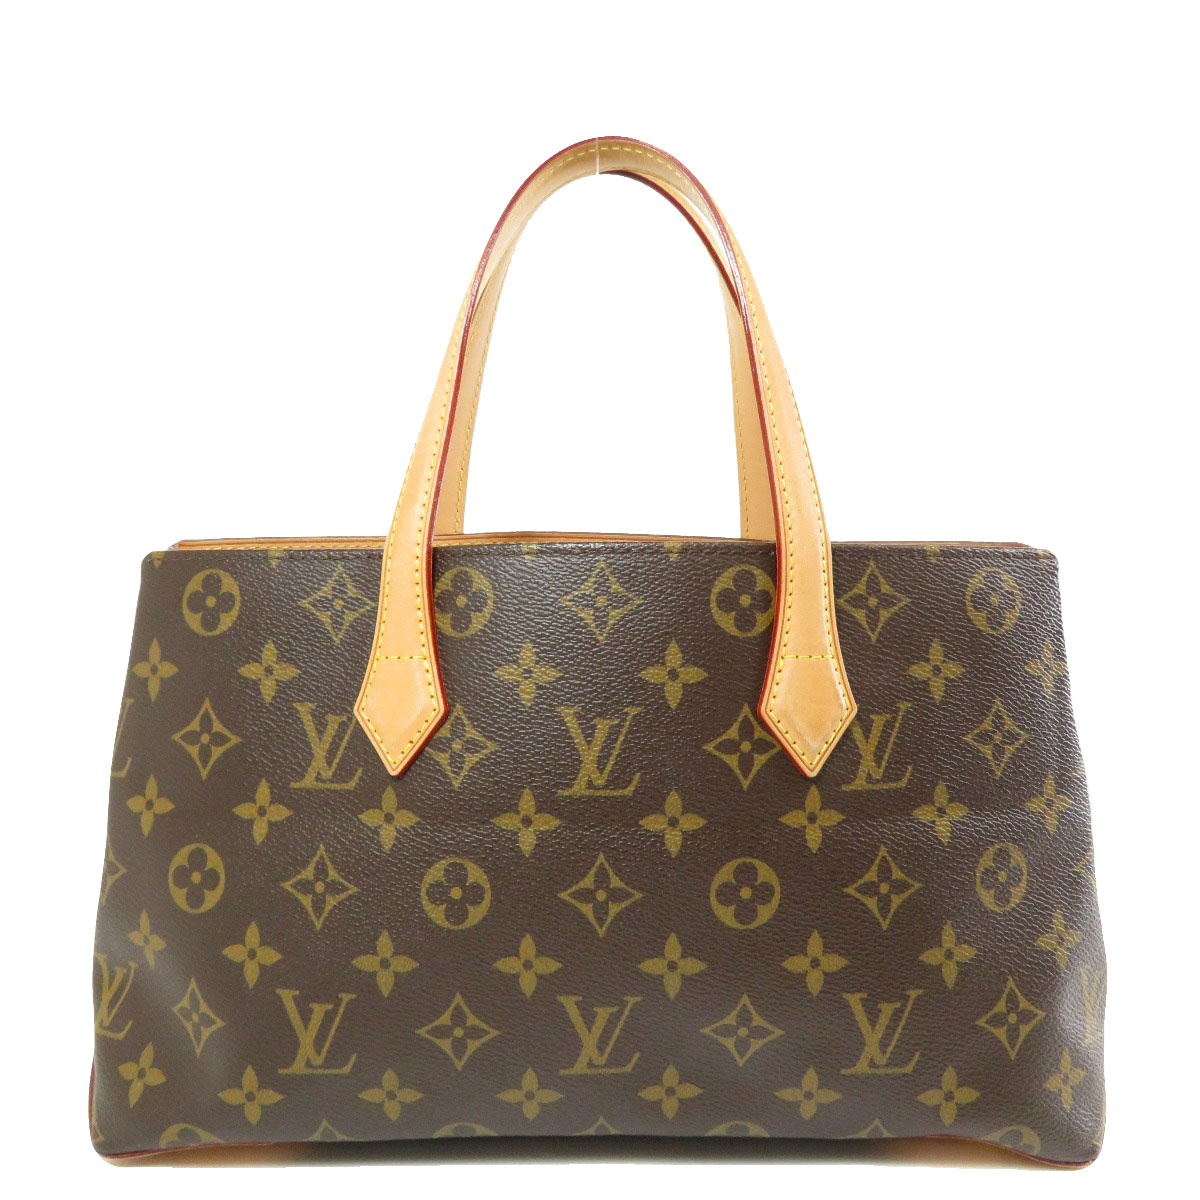 Louis Vuitton M45643 Wilshire PM Handbag Ladies ー The best place to buy Brand Bags Watches ...